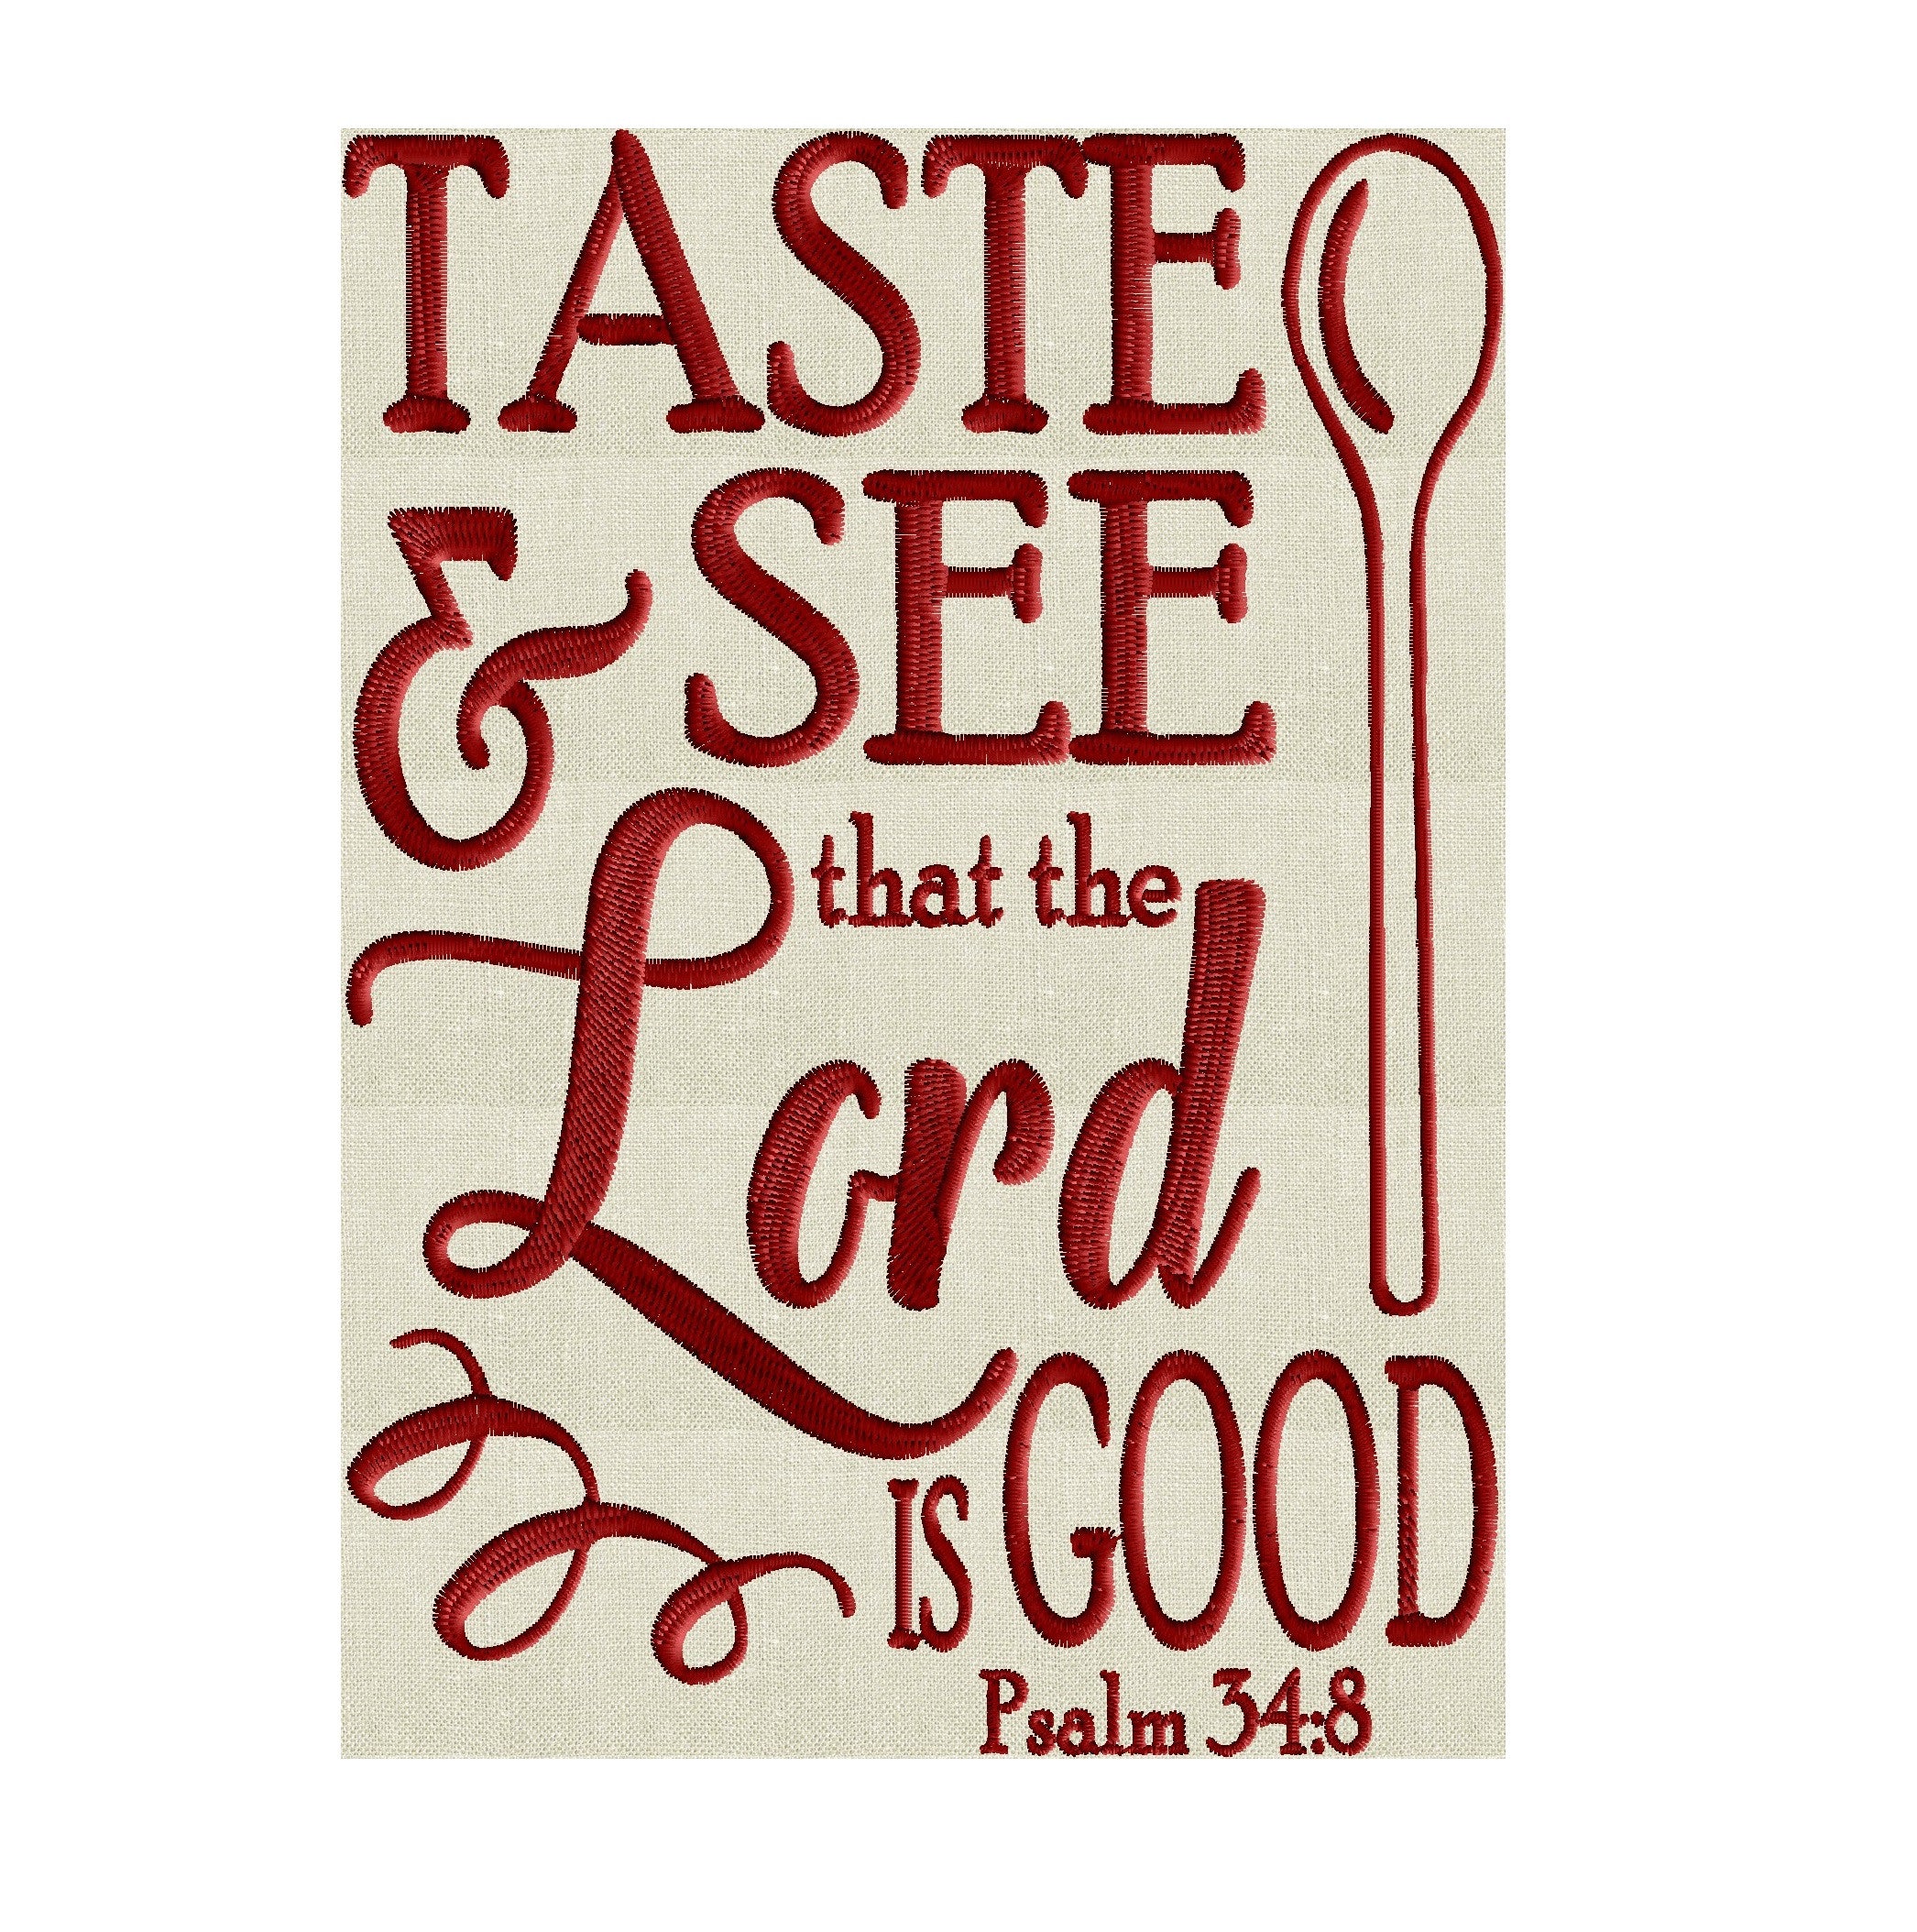 Taste and See... Psalm quote - EMBROIDERY DESIGN FILE- Instant download - Exp Jef Vp3 Pes Dst formats - 2 sizes 1 color